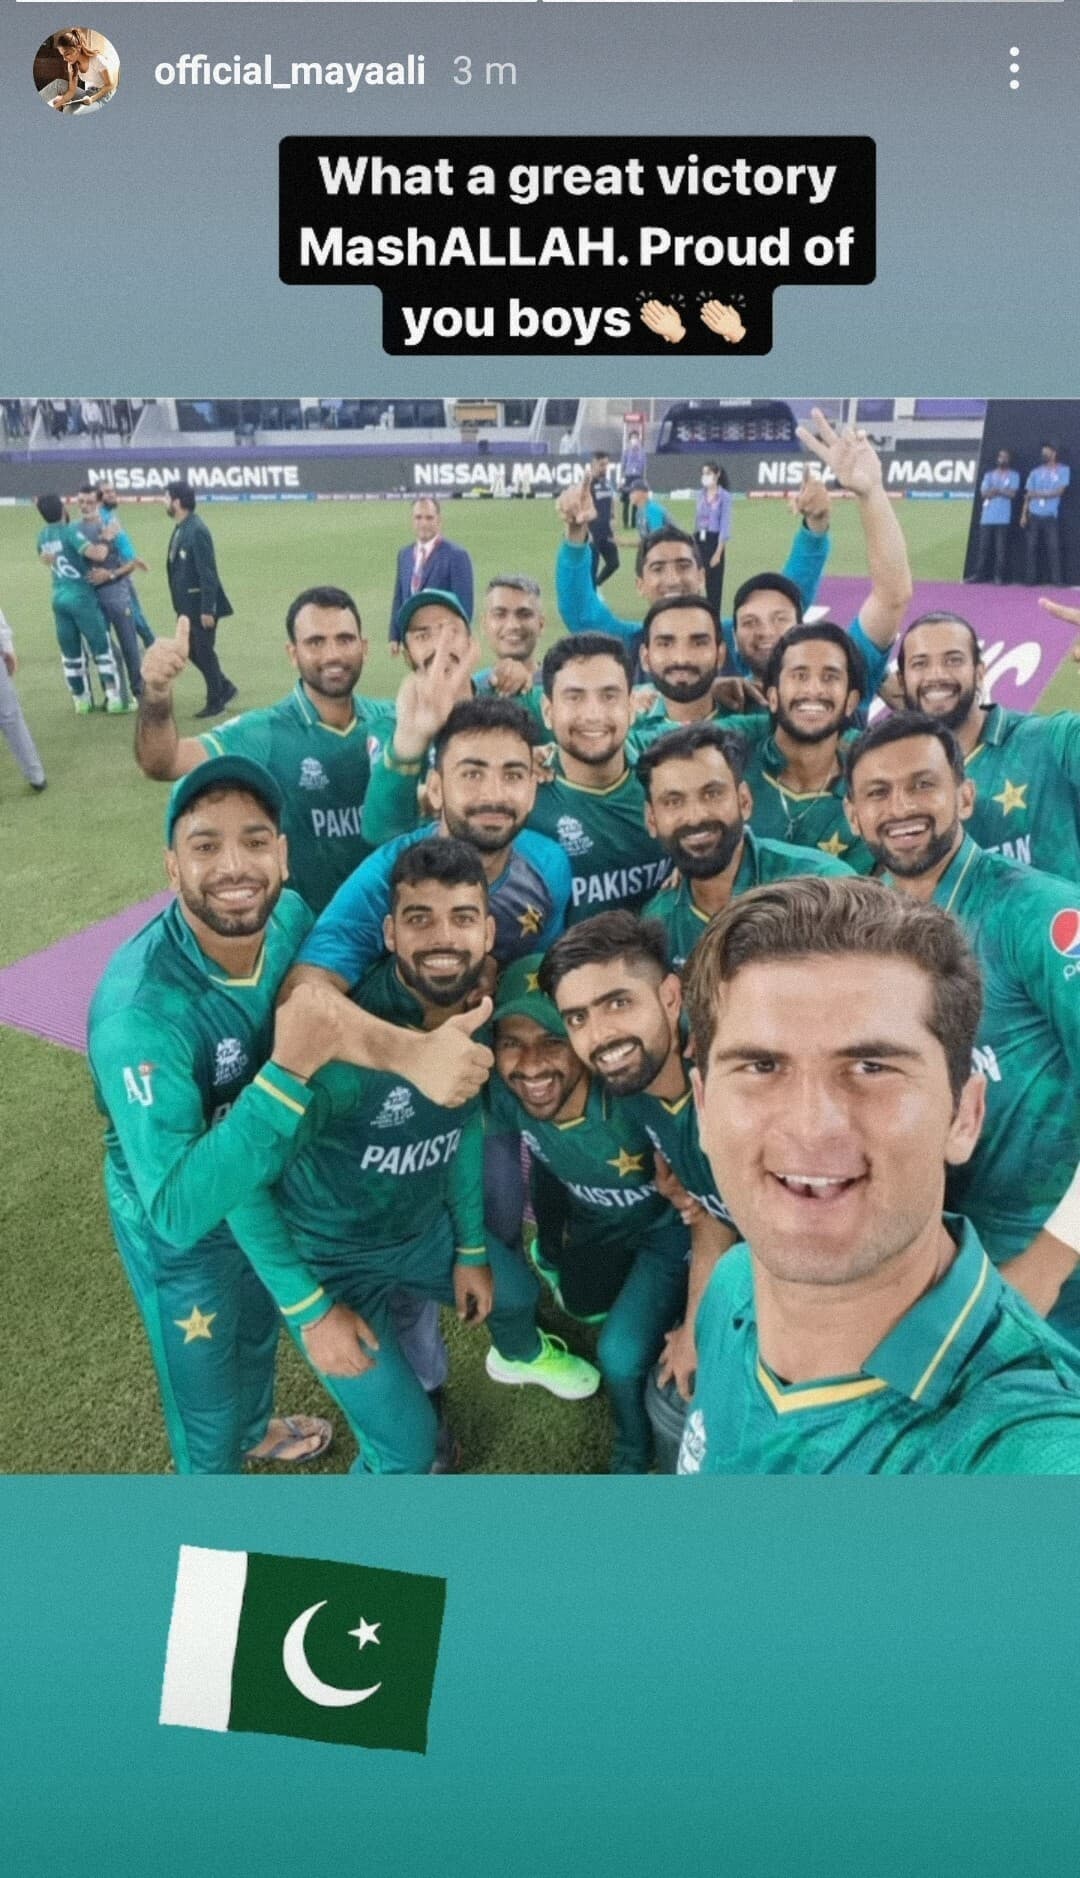 Celebrities laud Pakistan’s historic win against India in T20 World Cup match